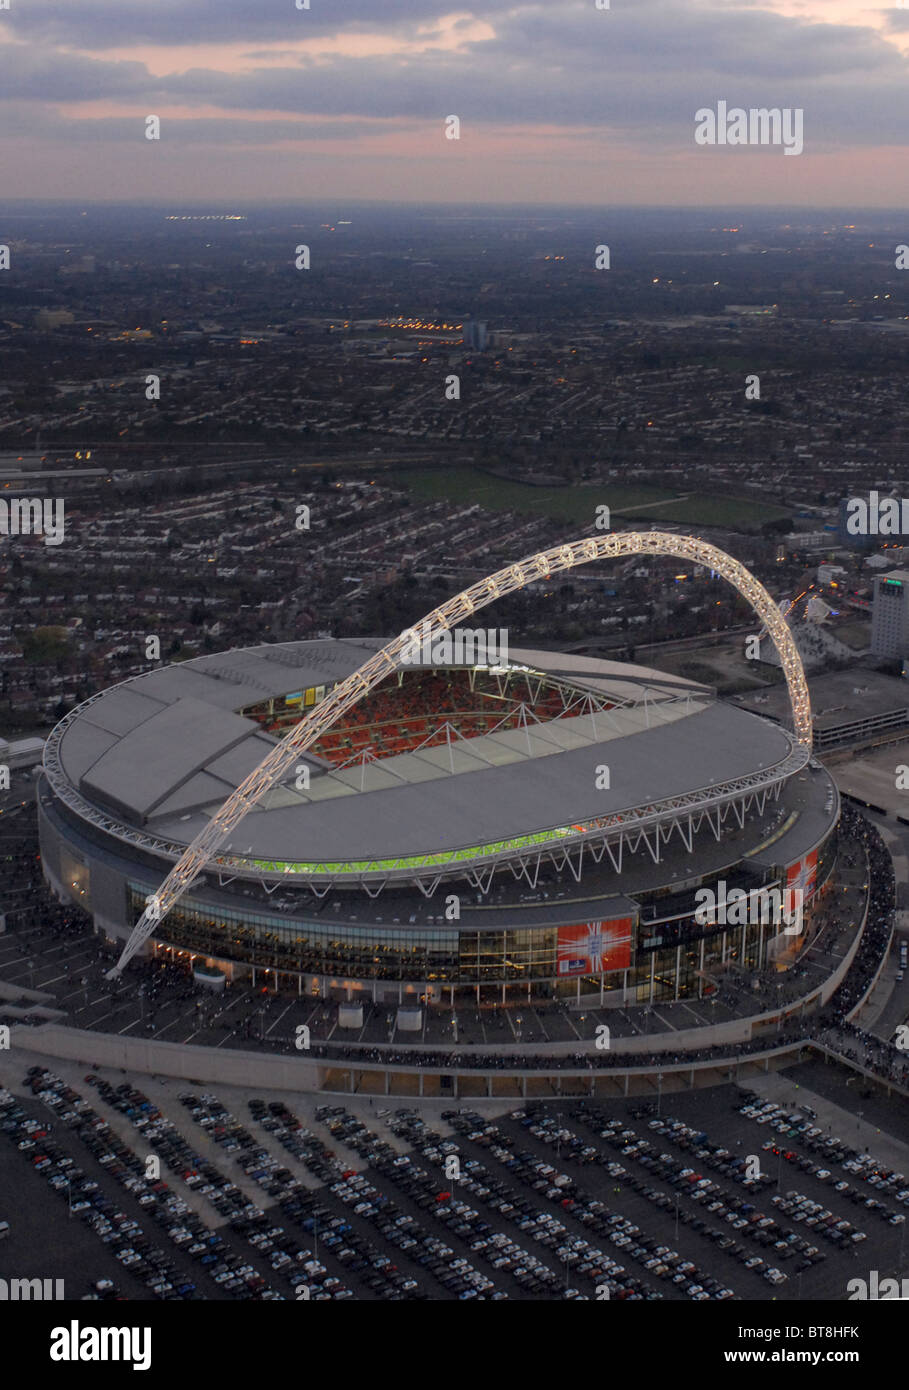 Wembley football stadium aerial view at dusk shot during football international with arch lit Stock Photo